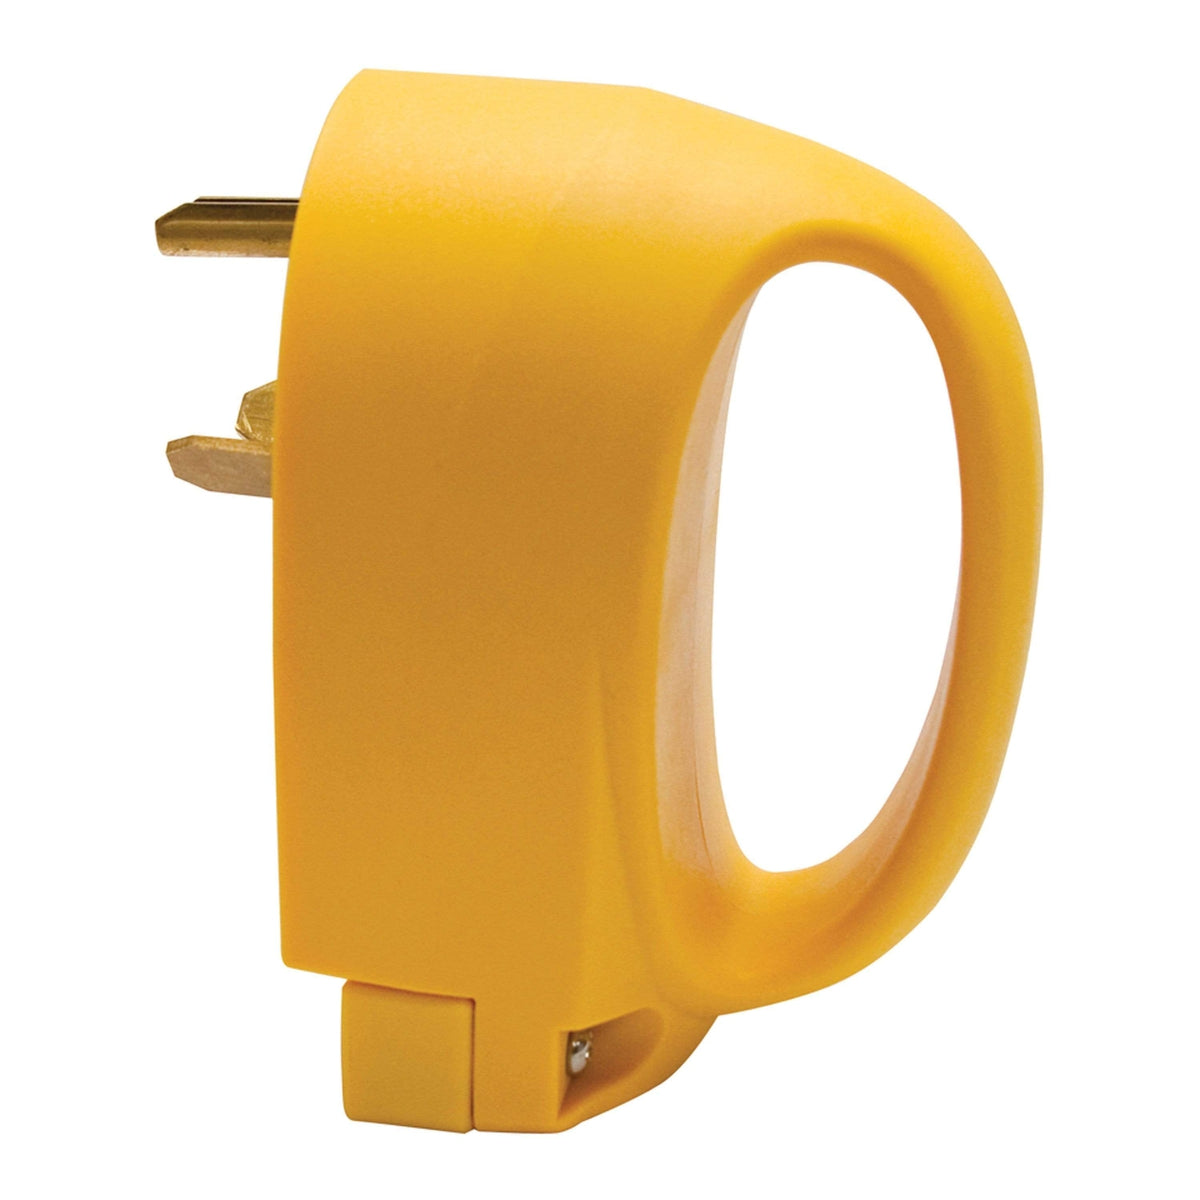 ParkPower 30a Male Replacement Plug with Handle 30a #30MPRV